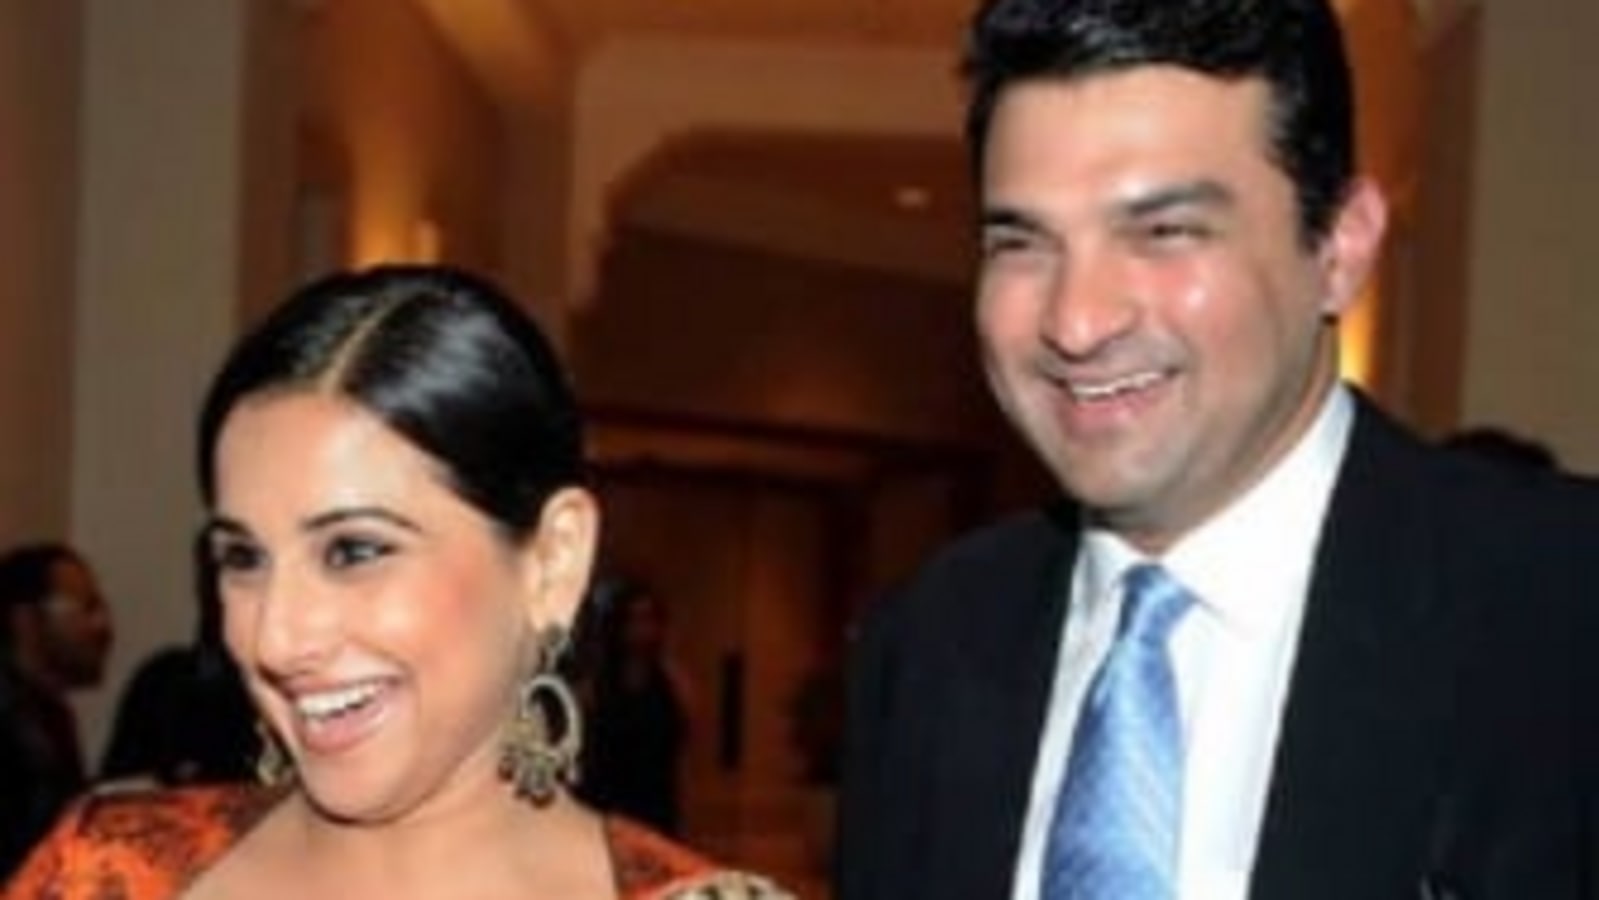 Vidya Balan now appreciates marriage because of Siddharth Roy Kapur, earlier felt ‘live-in or married doesn’t matter’